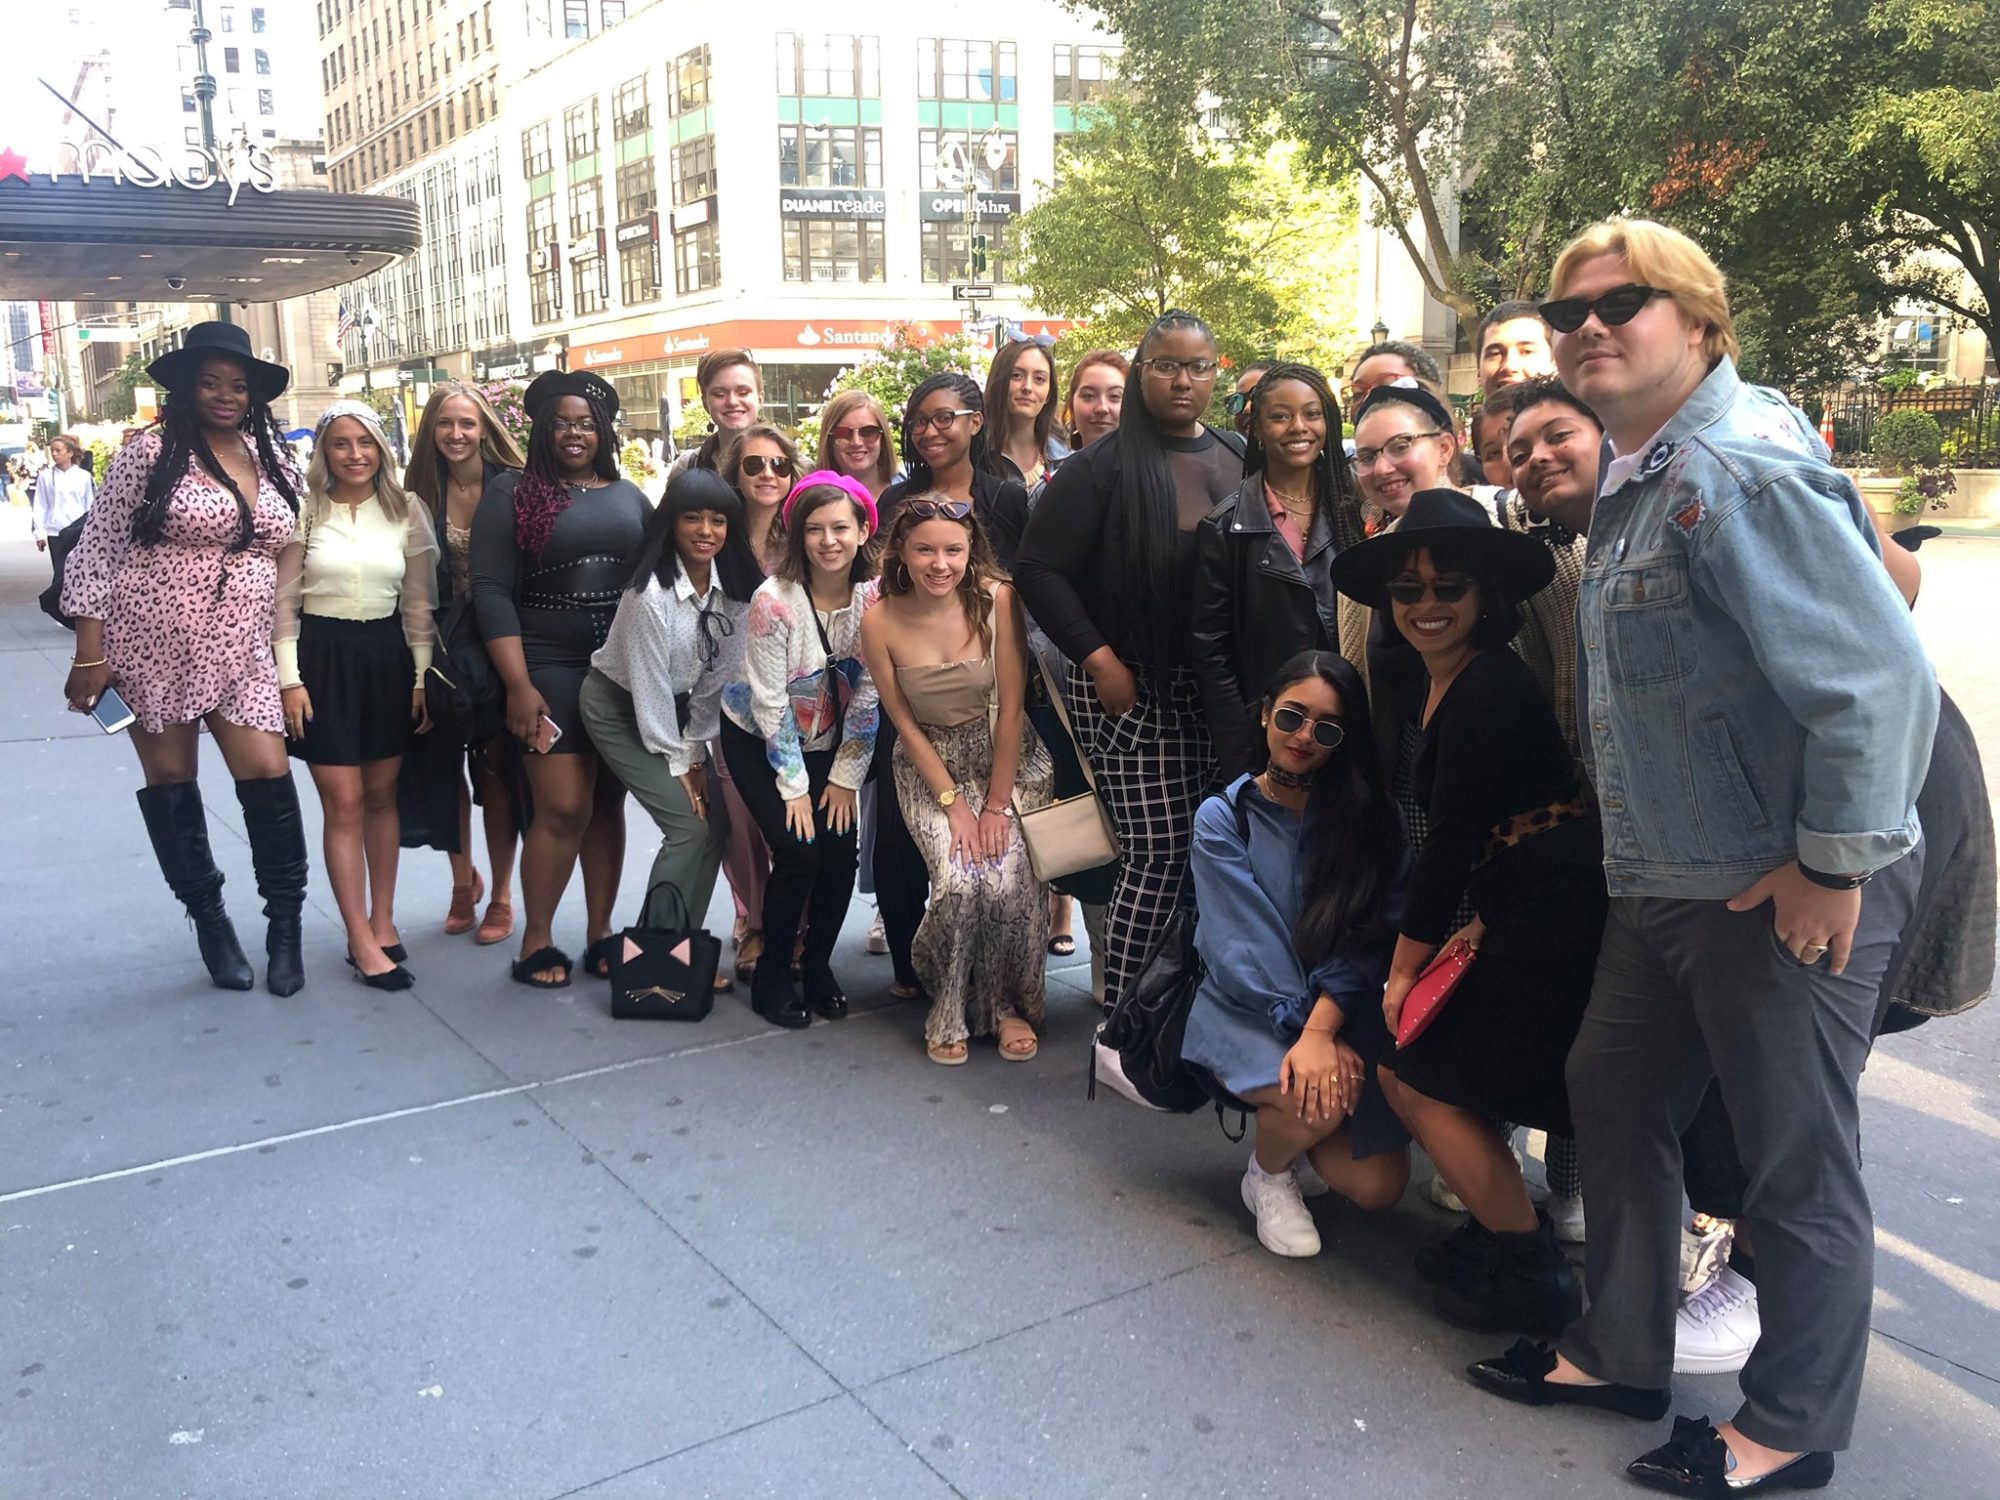 Group shot of fashion students in the NYC fashion immersion program.